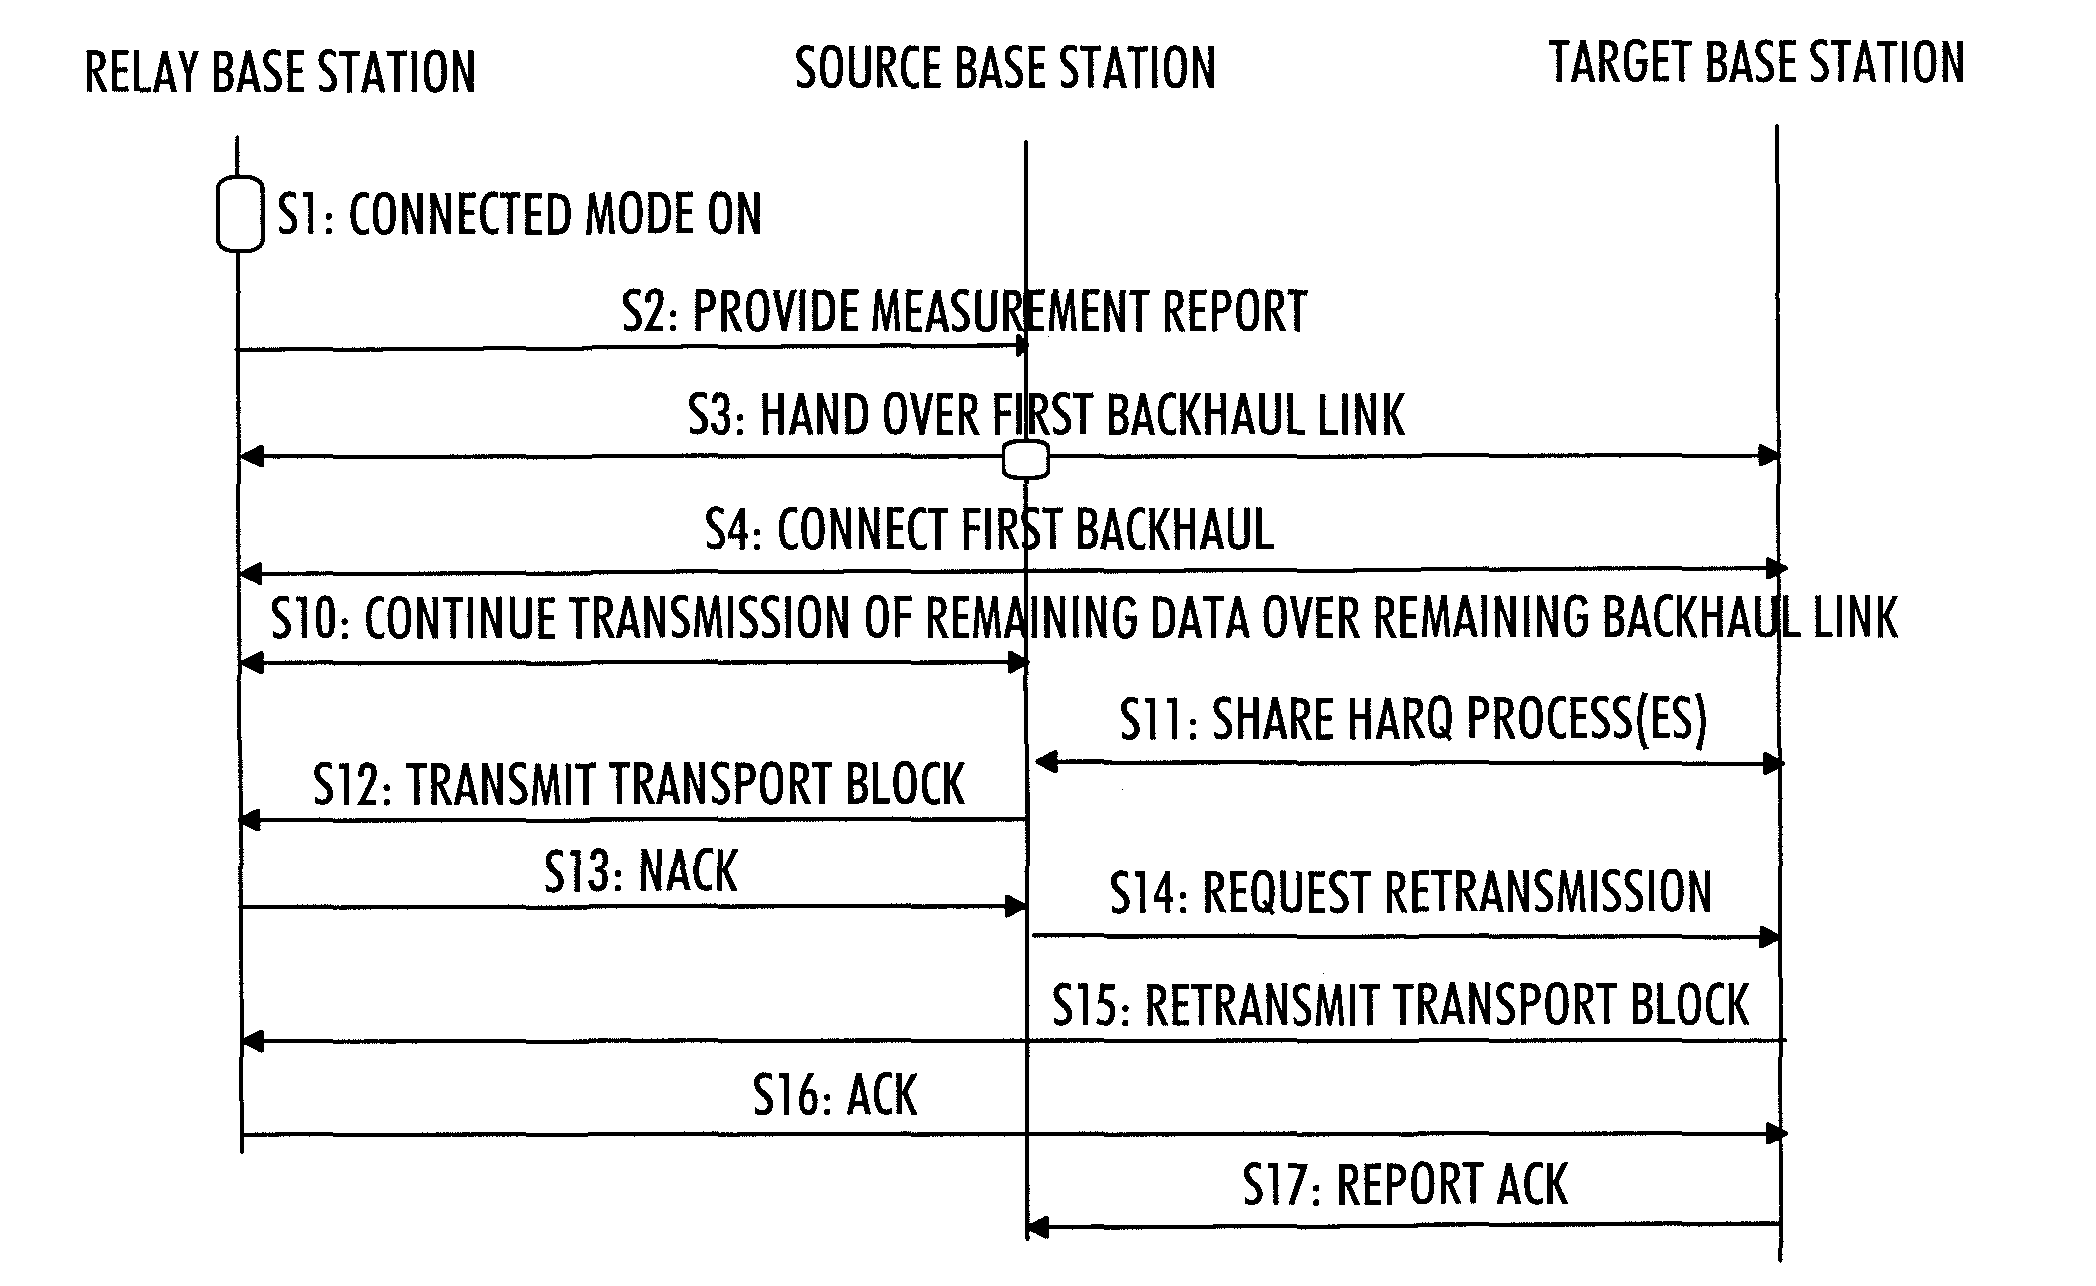 Handing Over Relayed Connections in Mobile Environment